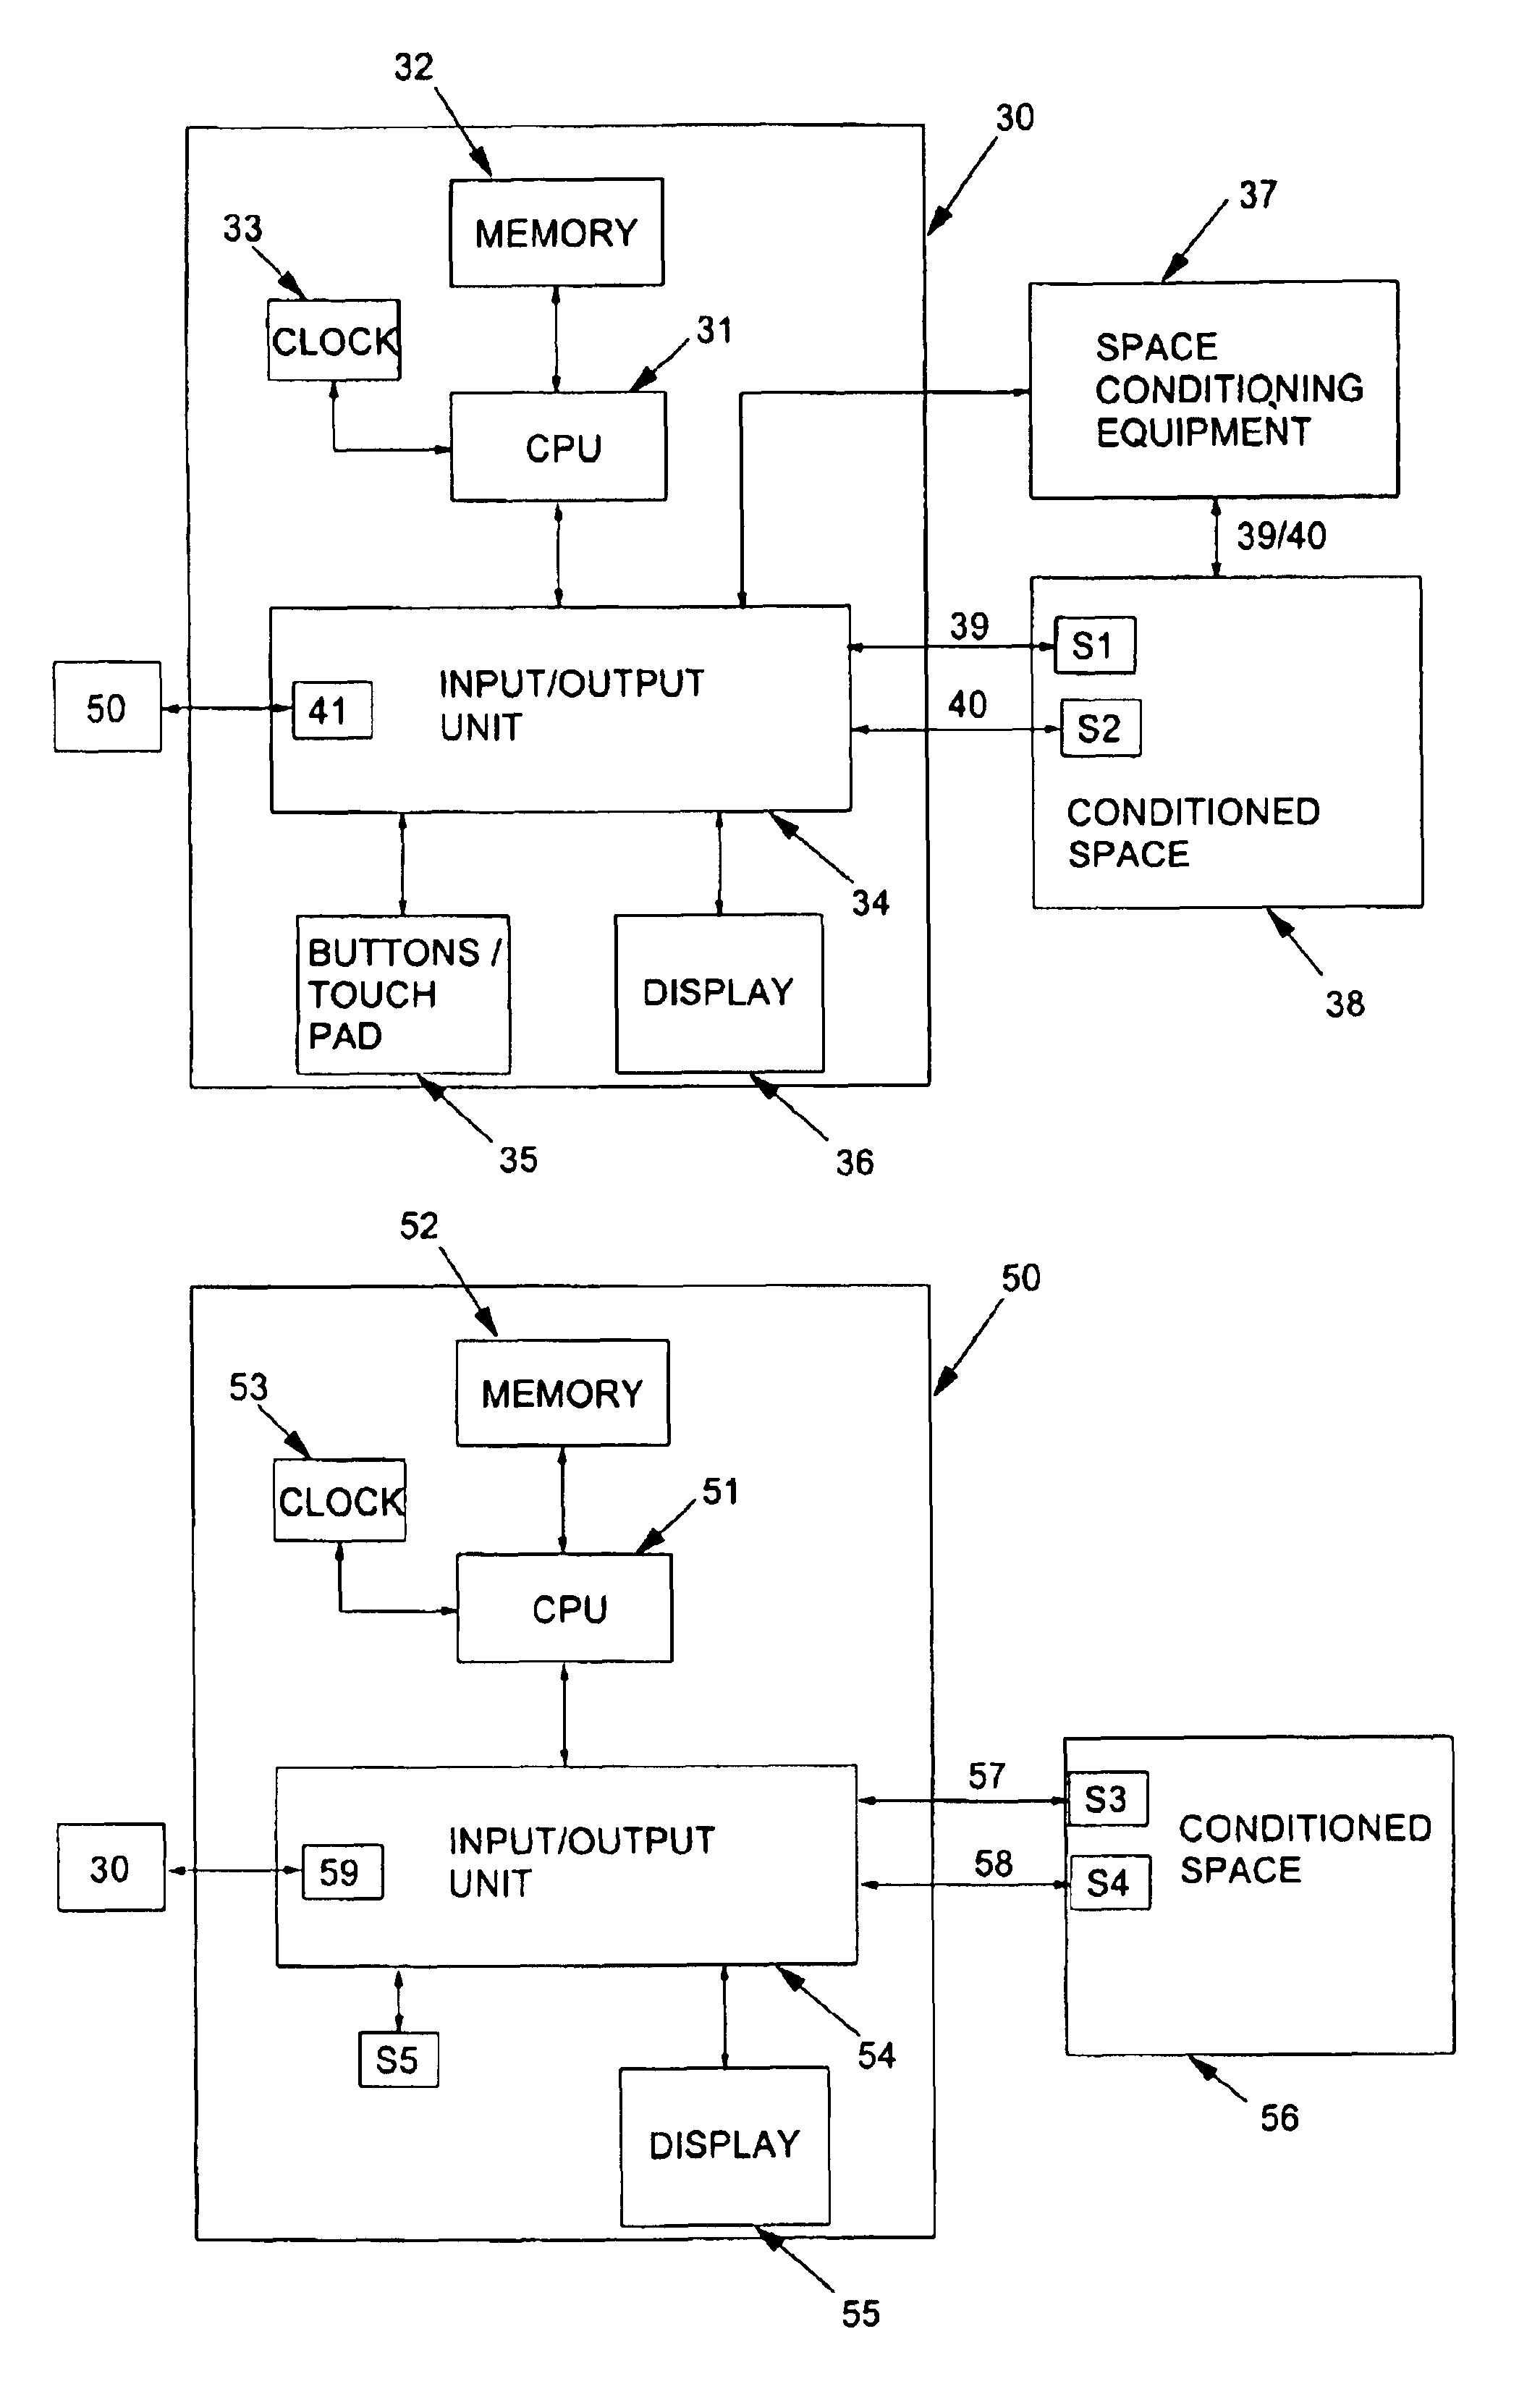 Thermostat system with remote data averaging